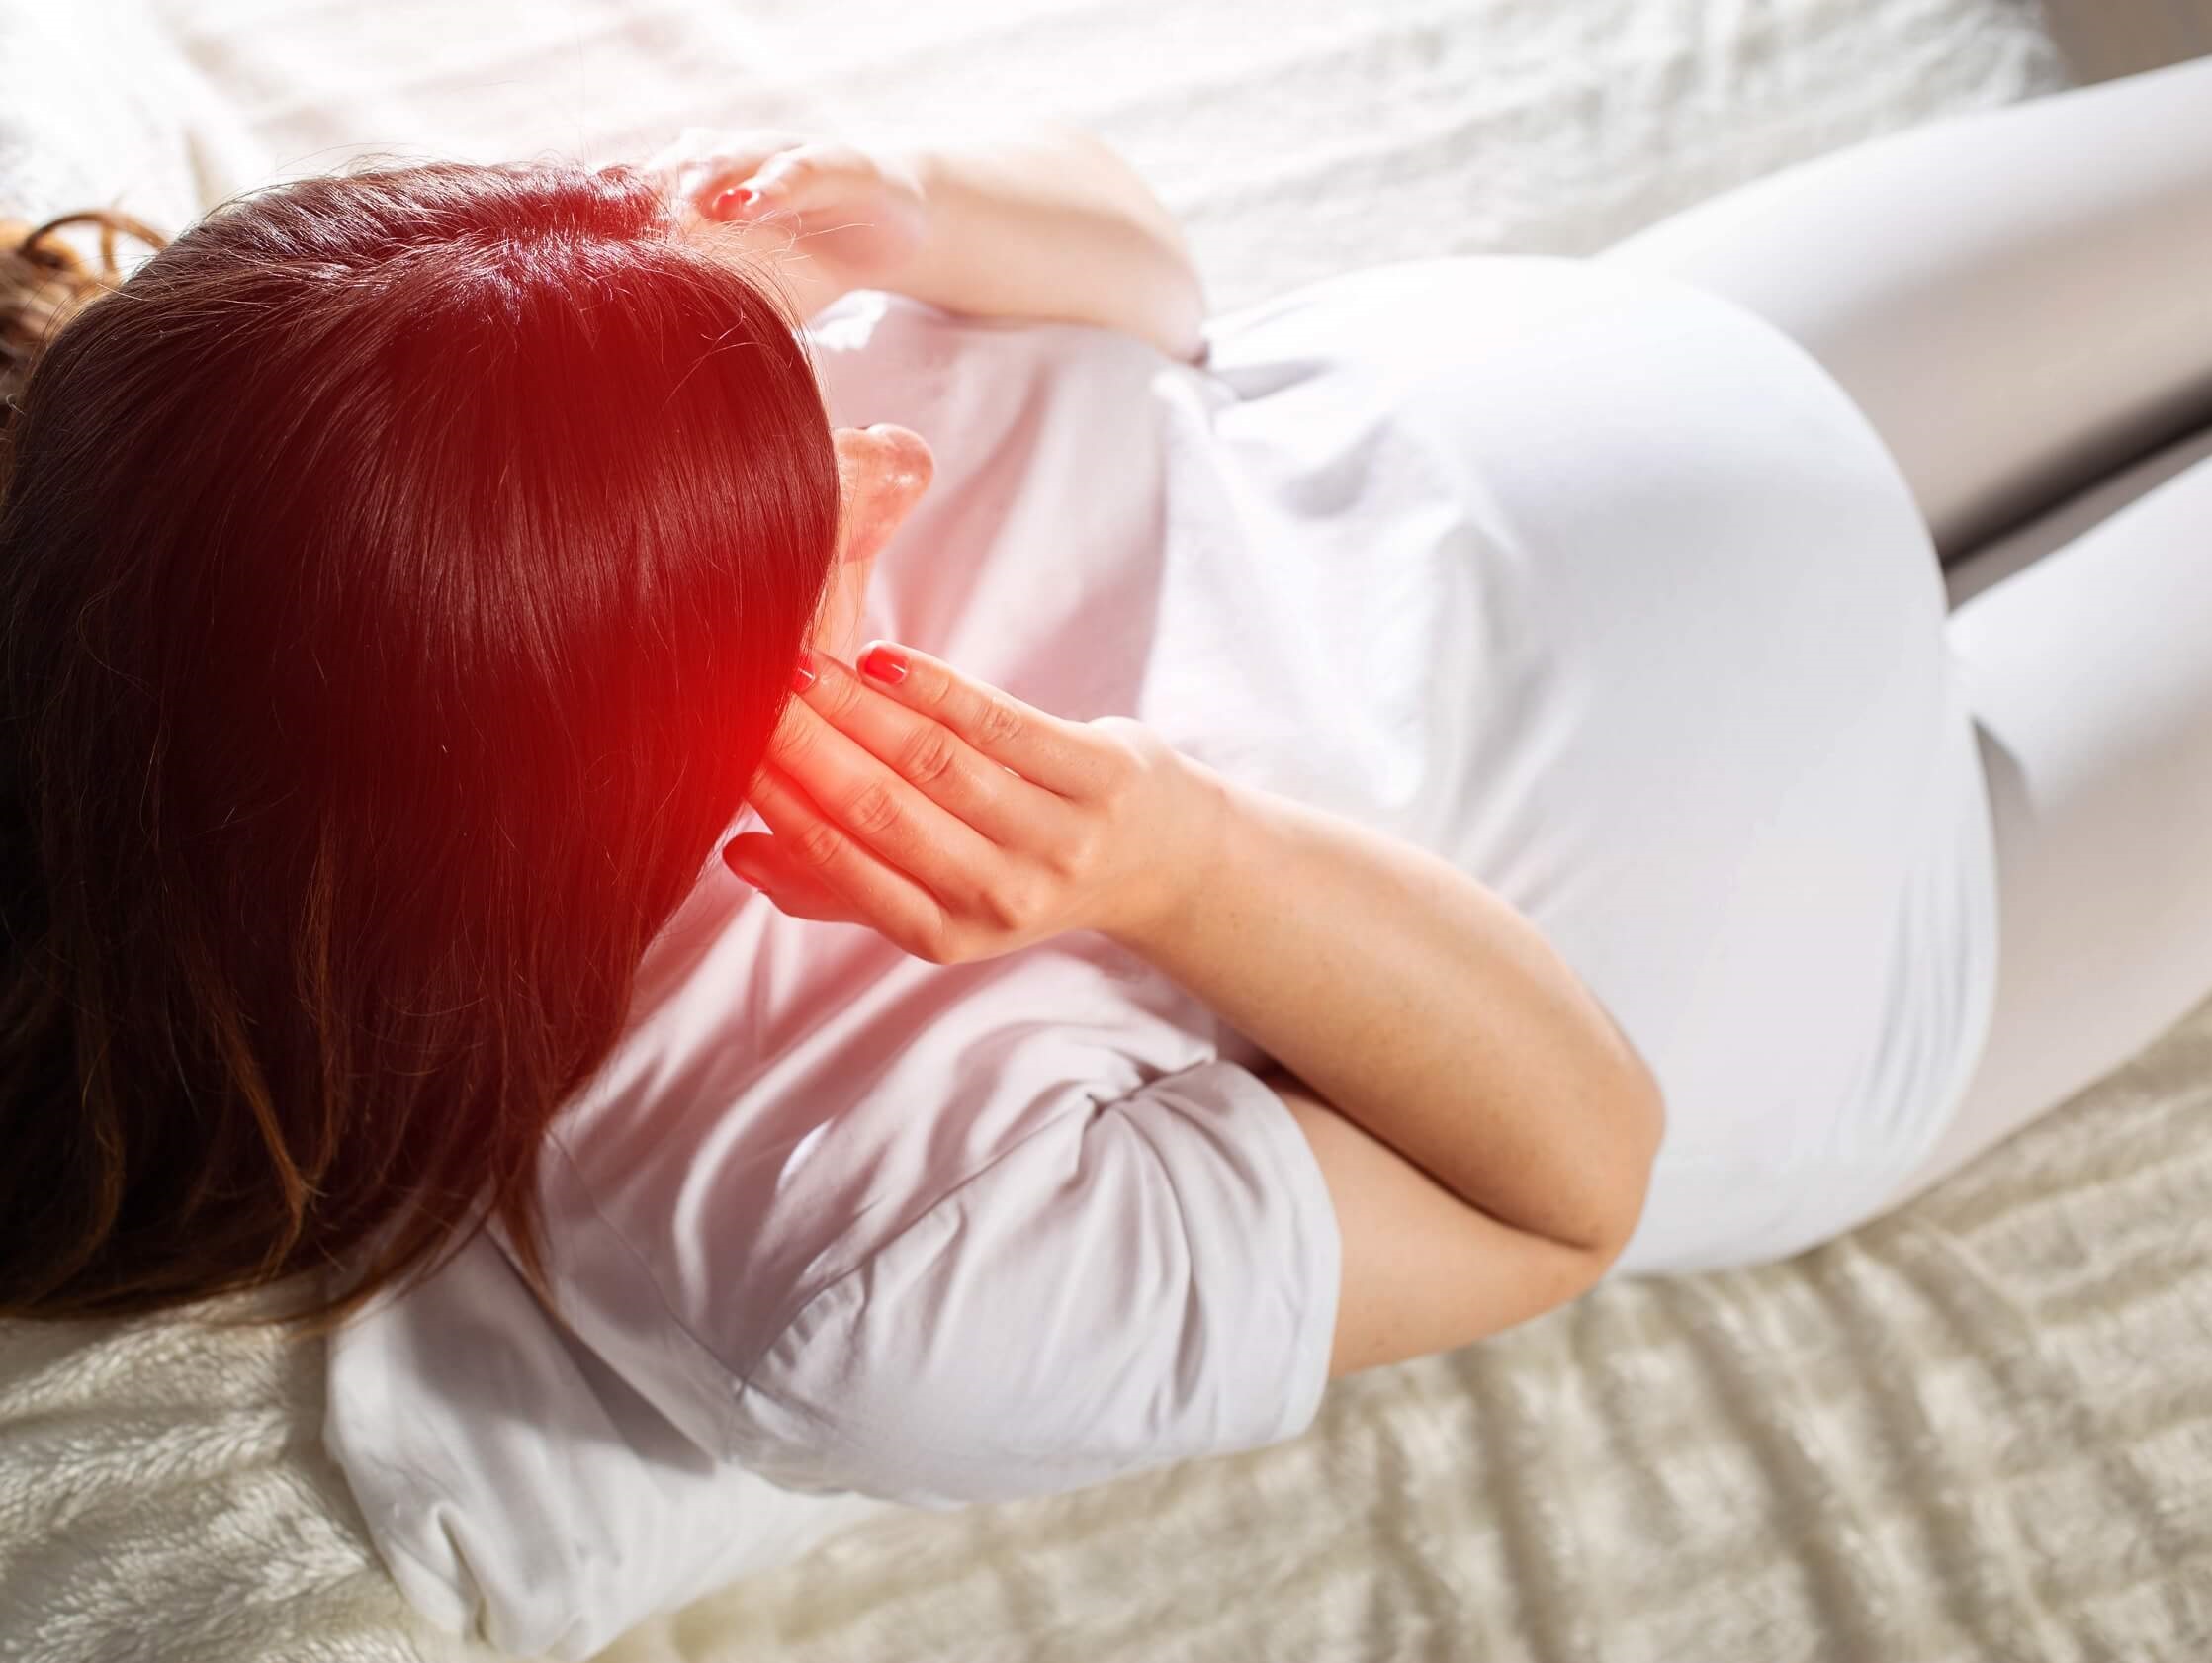 Chronic Headache While Pregnant: Why Does It Happen, and What Can You Do?